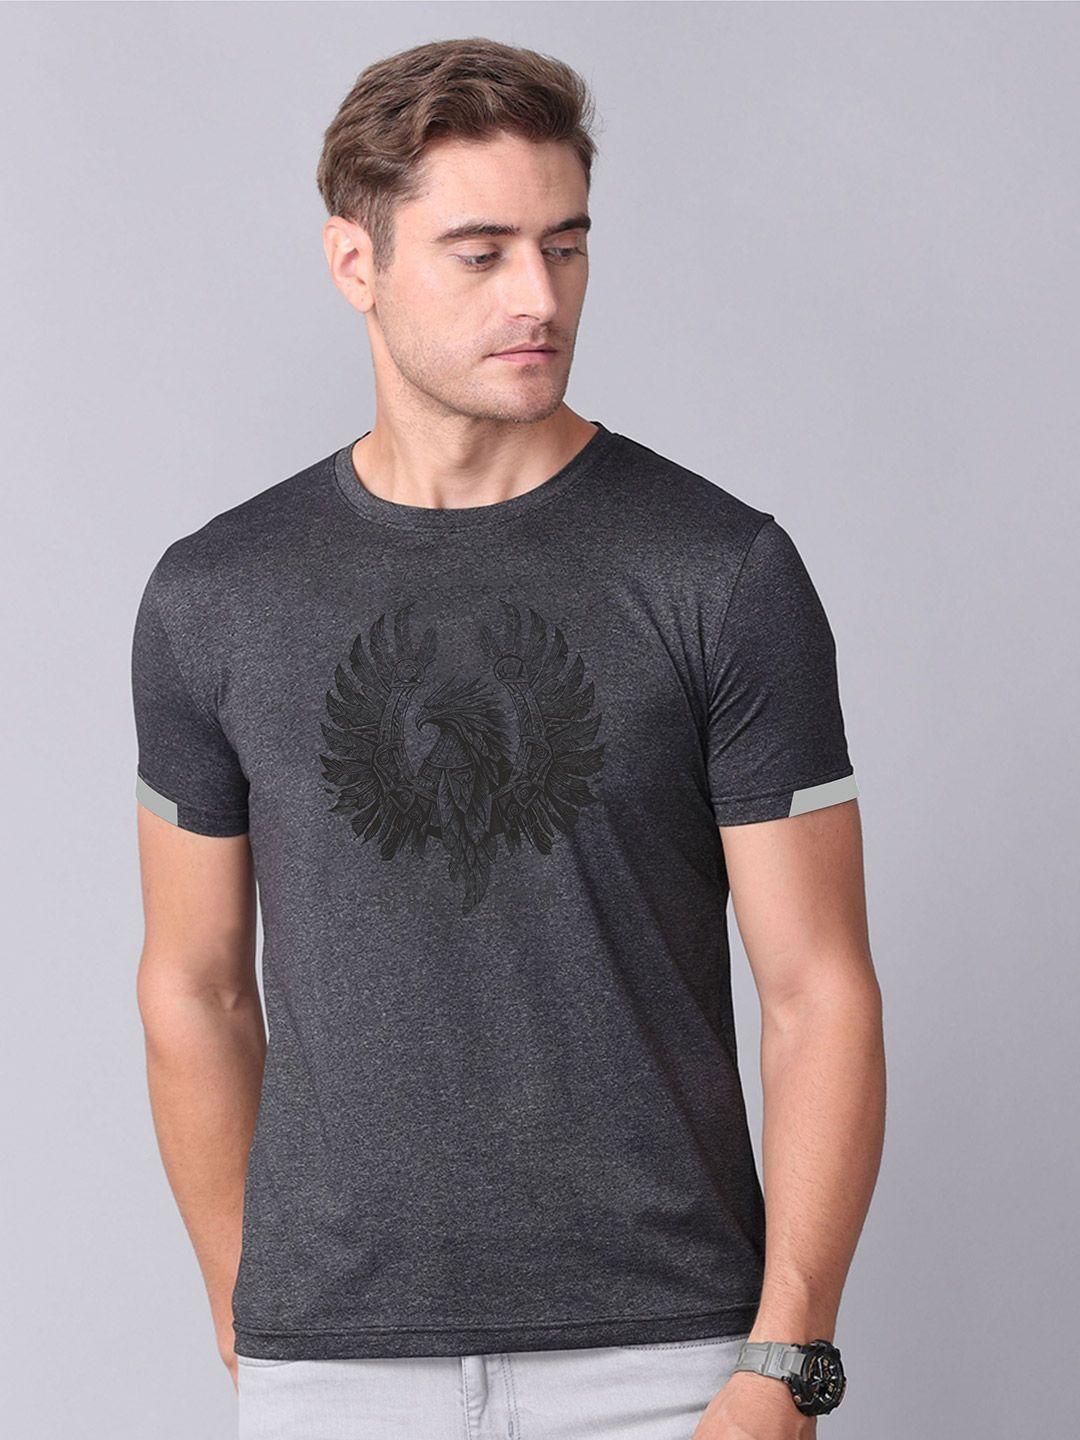 stellers graphic printed cotton t-shirt